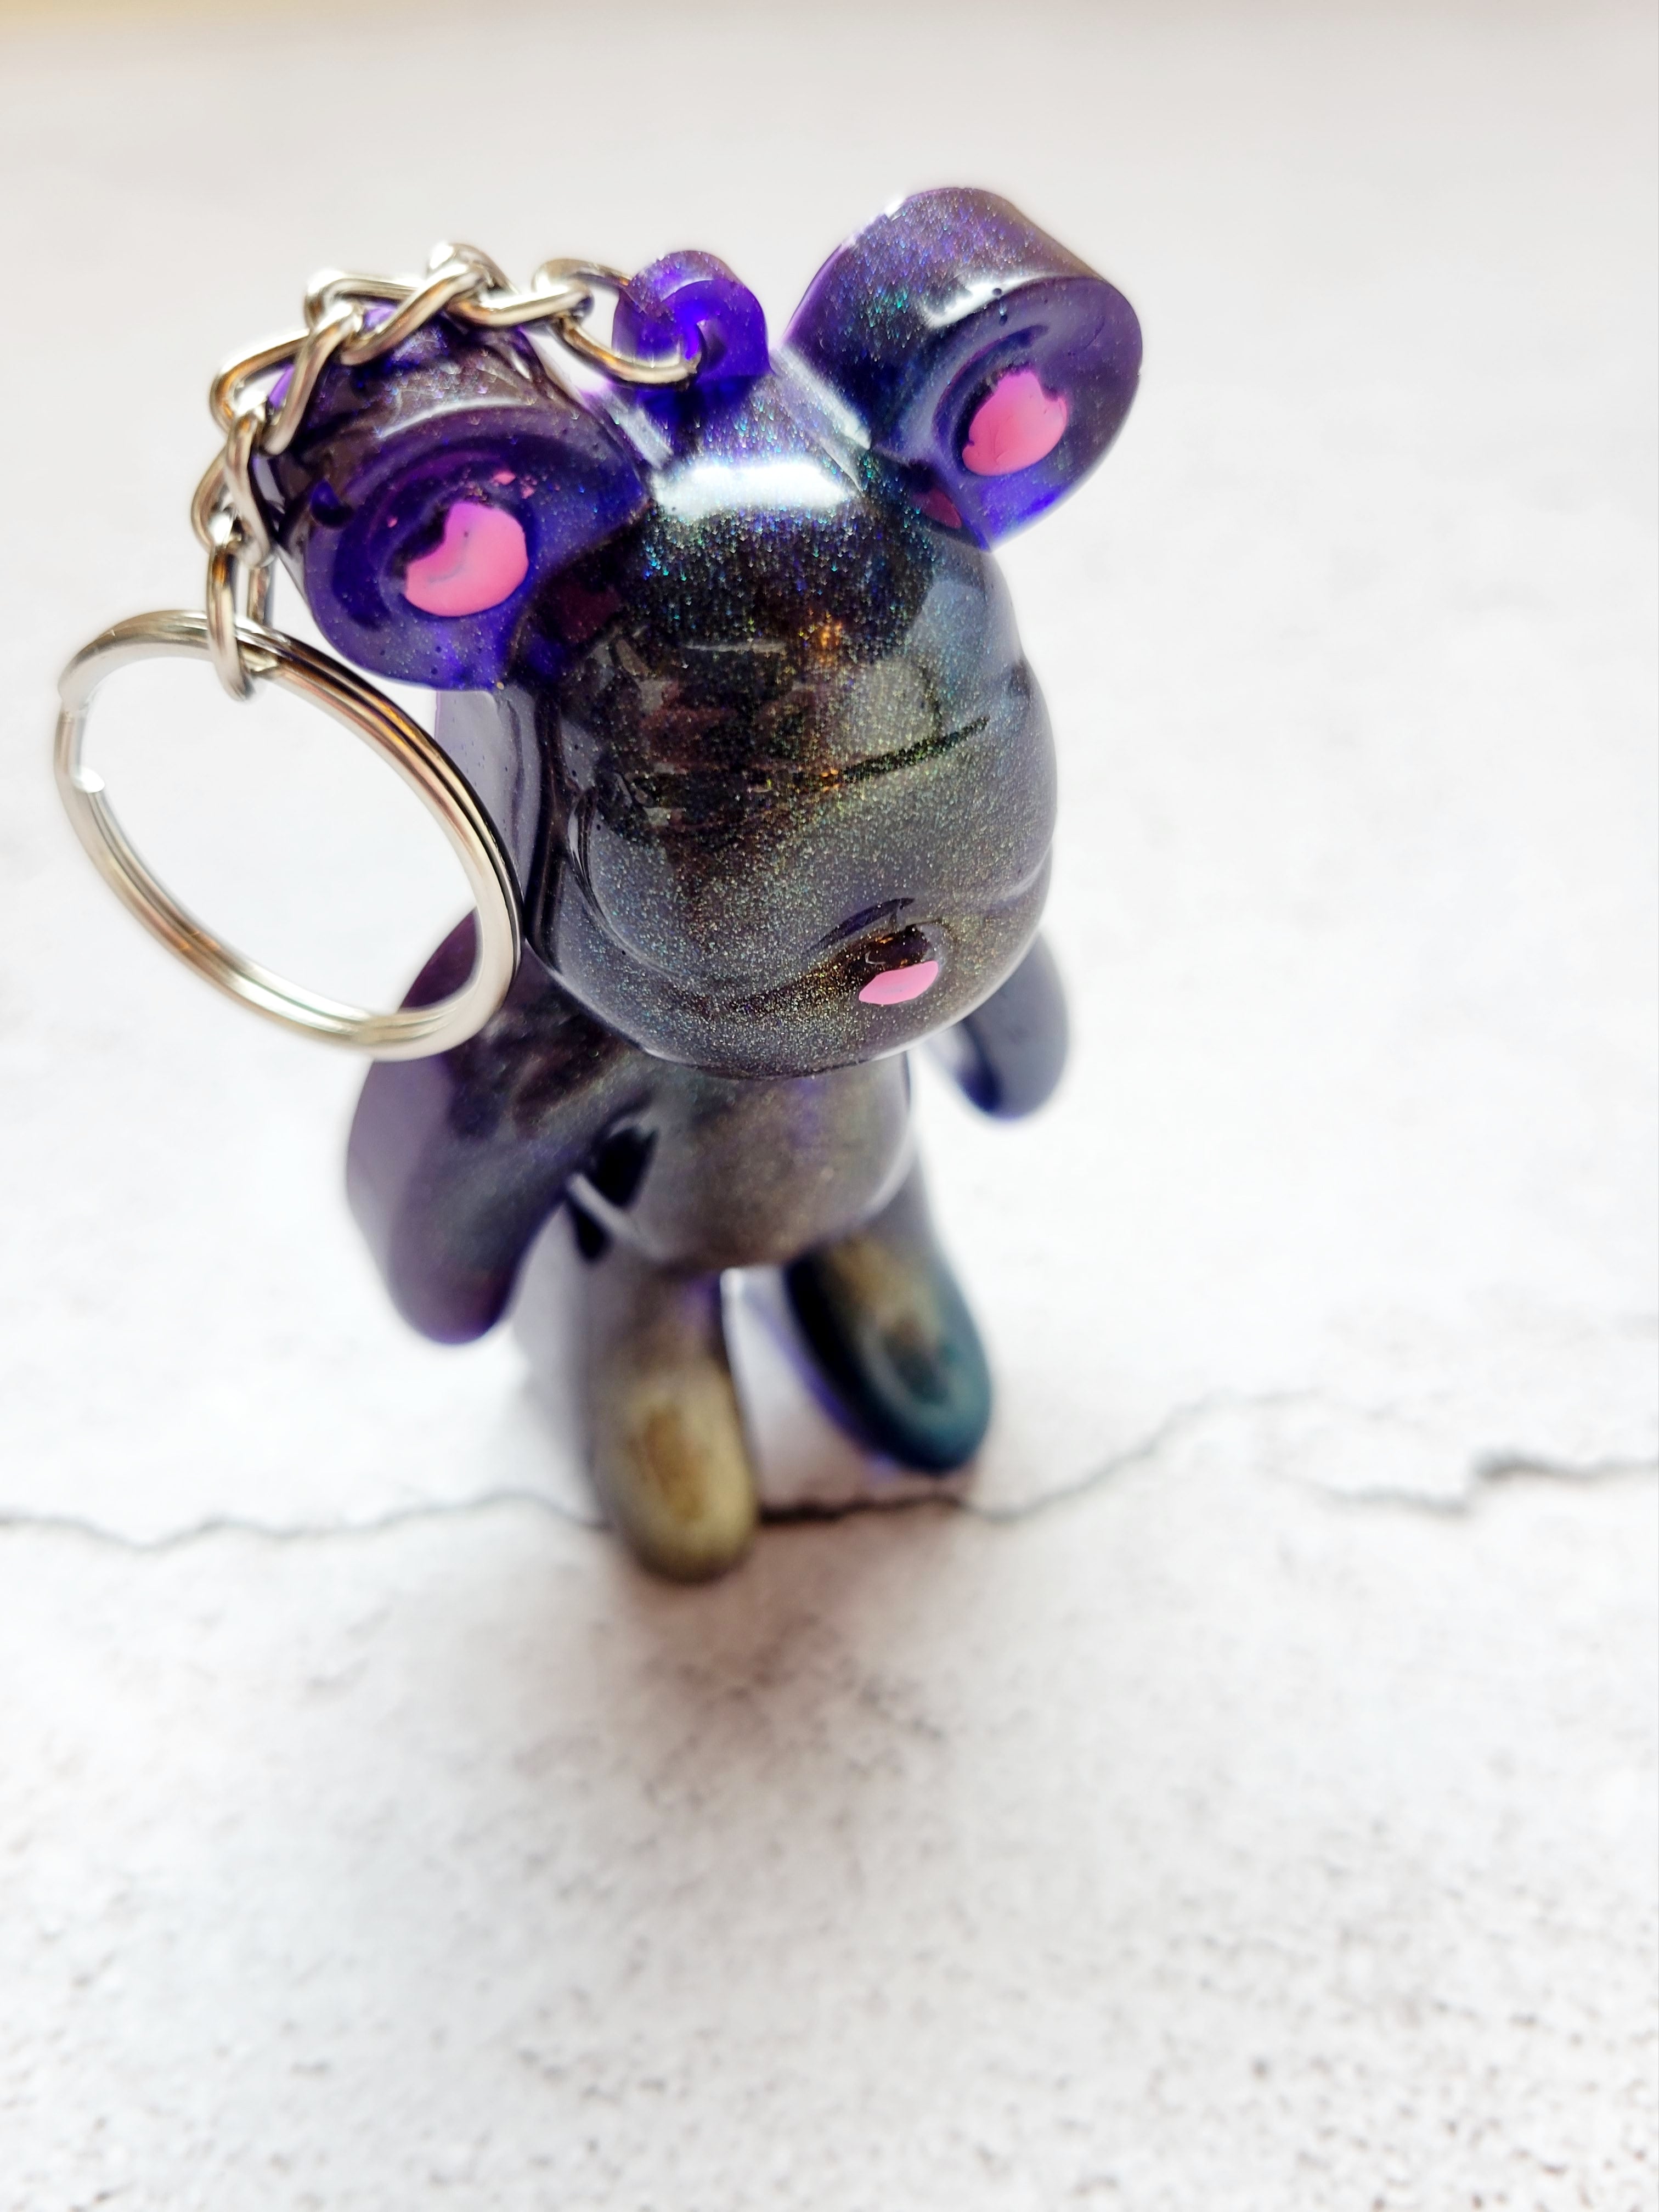 Standing front view of a snow goggle wearing bear keychain with pink nose and heart ears. The color is color shifting golds, blues, purples, with a silver keychain hoop